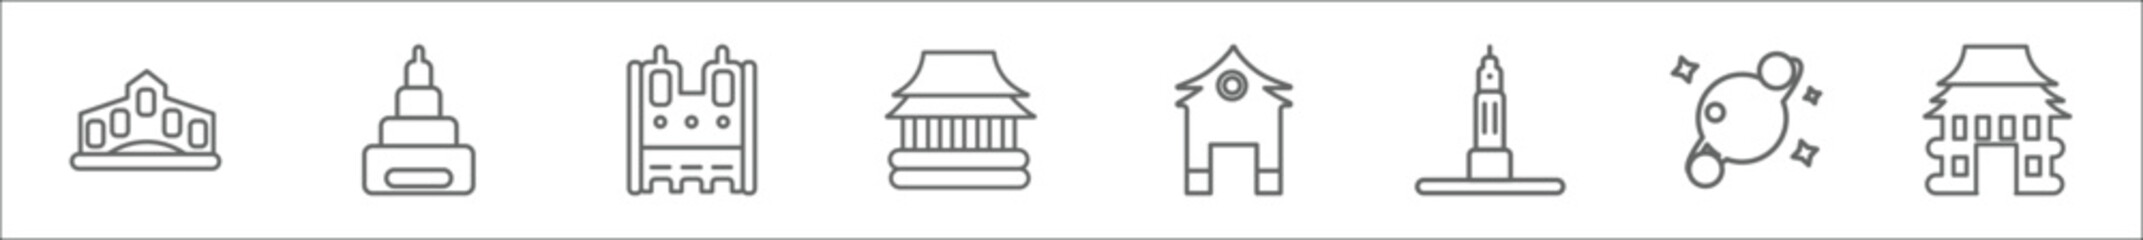 outline set of buildings line icons. linear vector icons such as rialto bridge, buddist cemetery, notre dame, chinese temple, pagoda, state building, space, buddhist temple